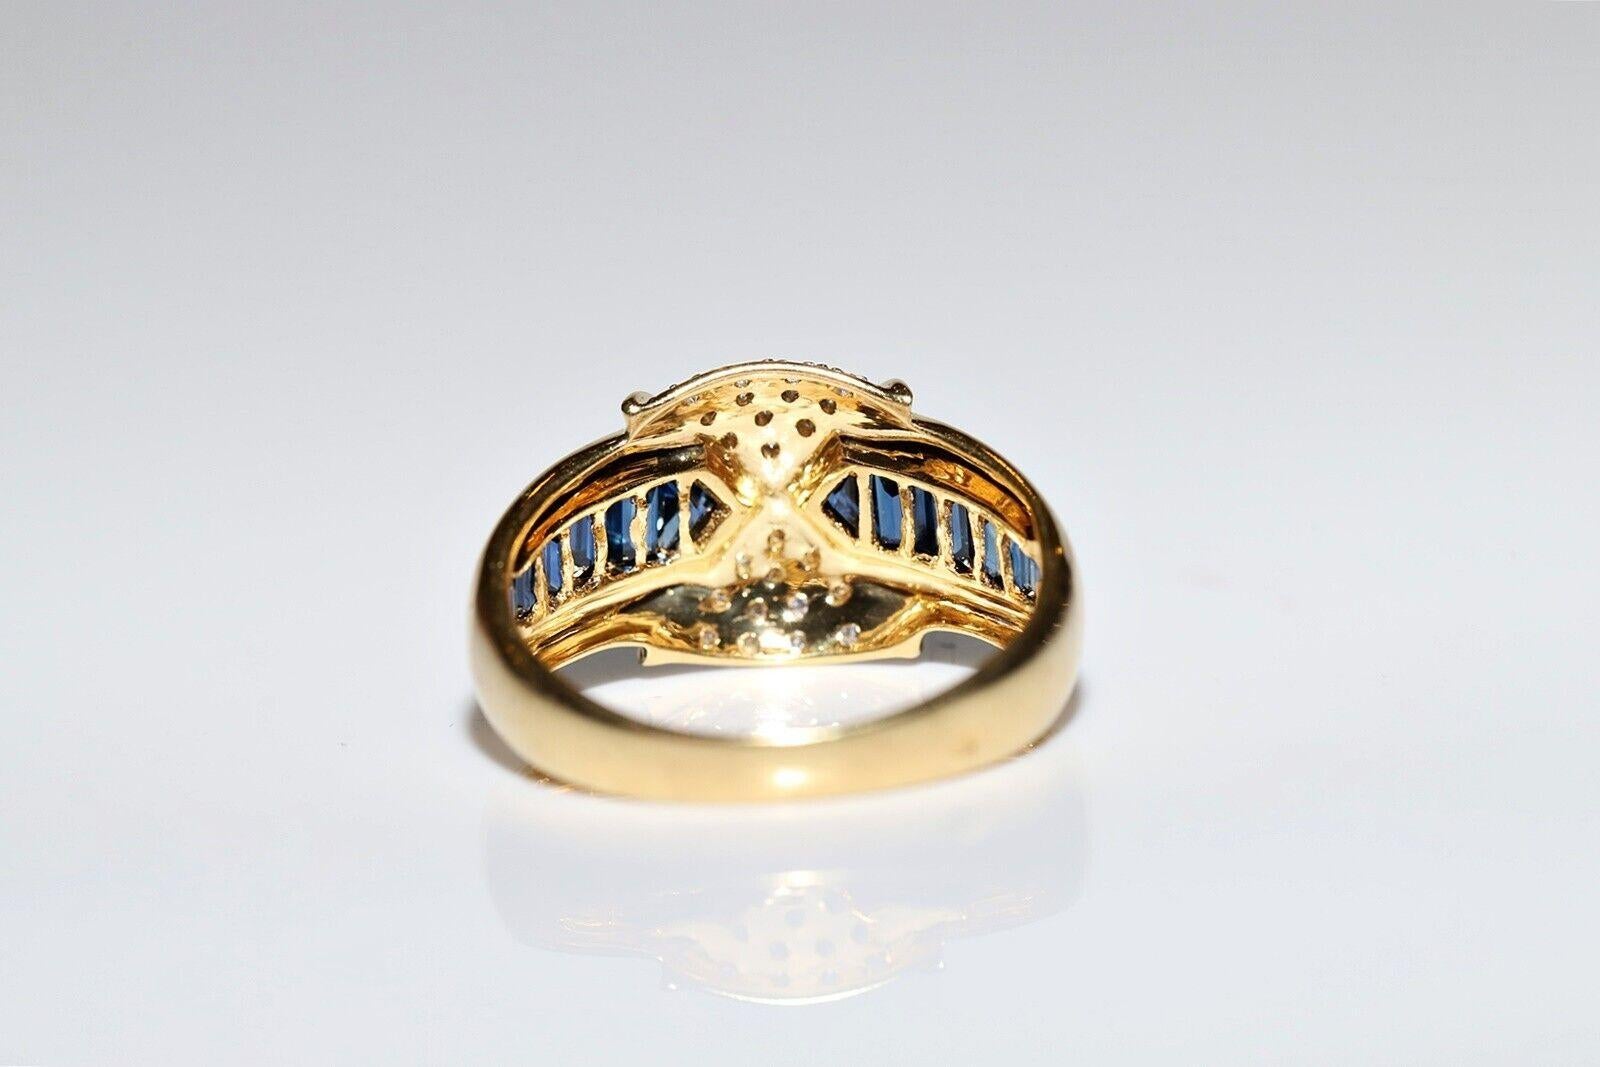  Vintage Circa 1980s 18k Gold Natural Diamond And Caliber Cut Sapphire Ring For Sale 1